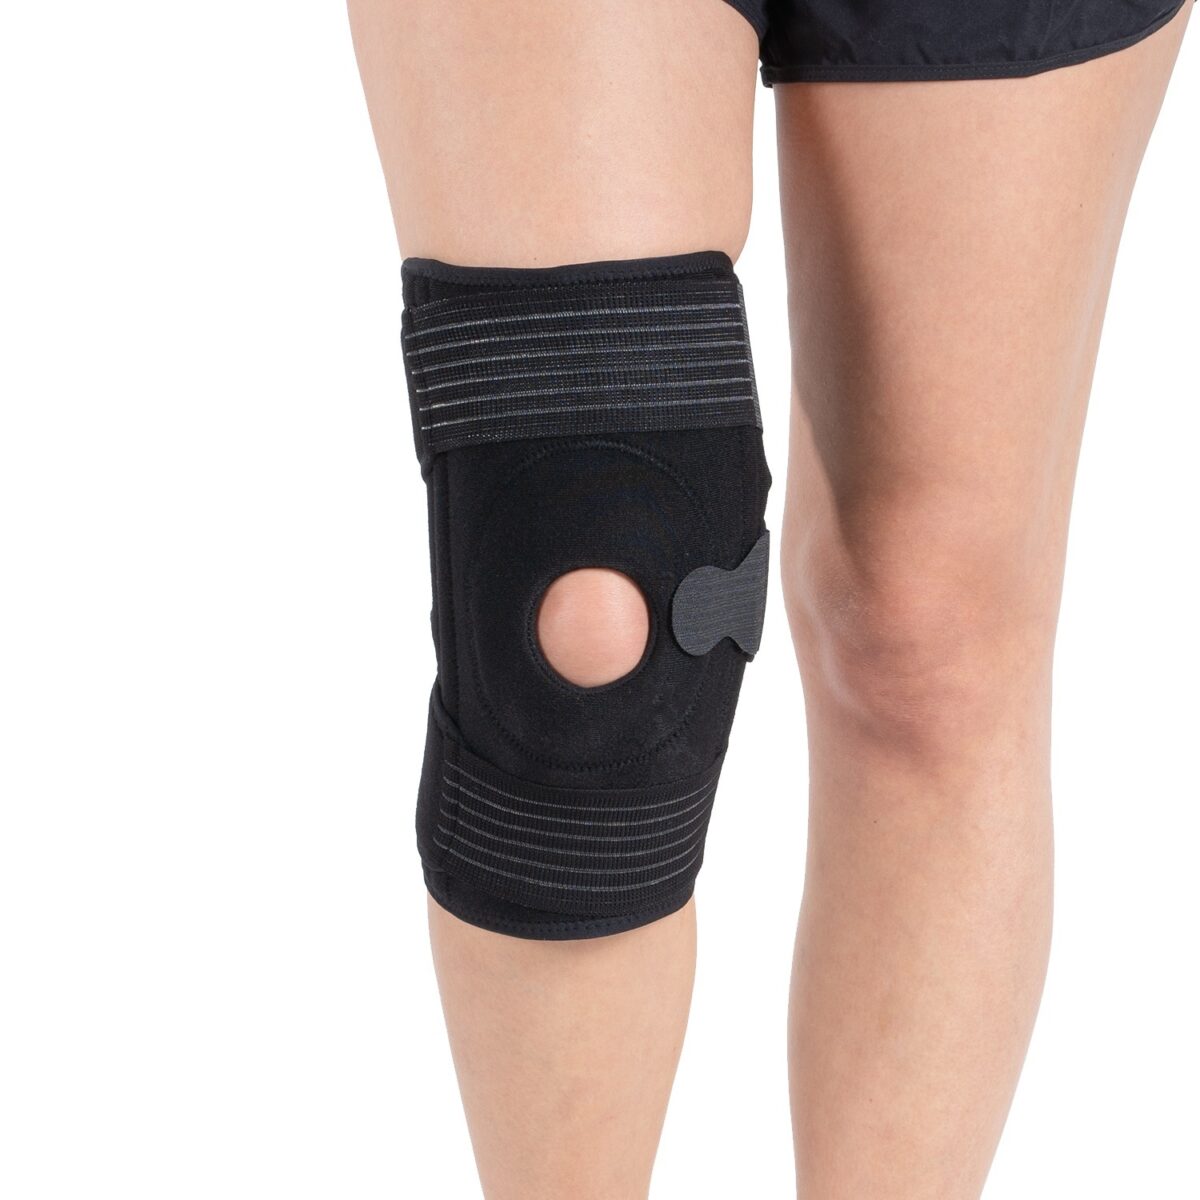 wingmed orthopedic equipments W507 ligament knee support 25